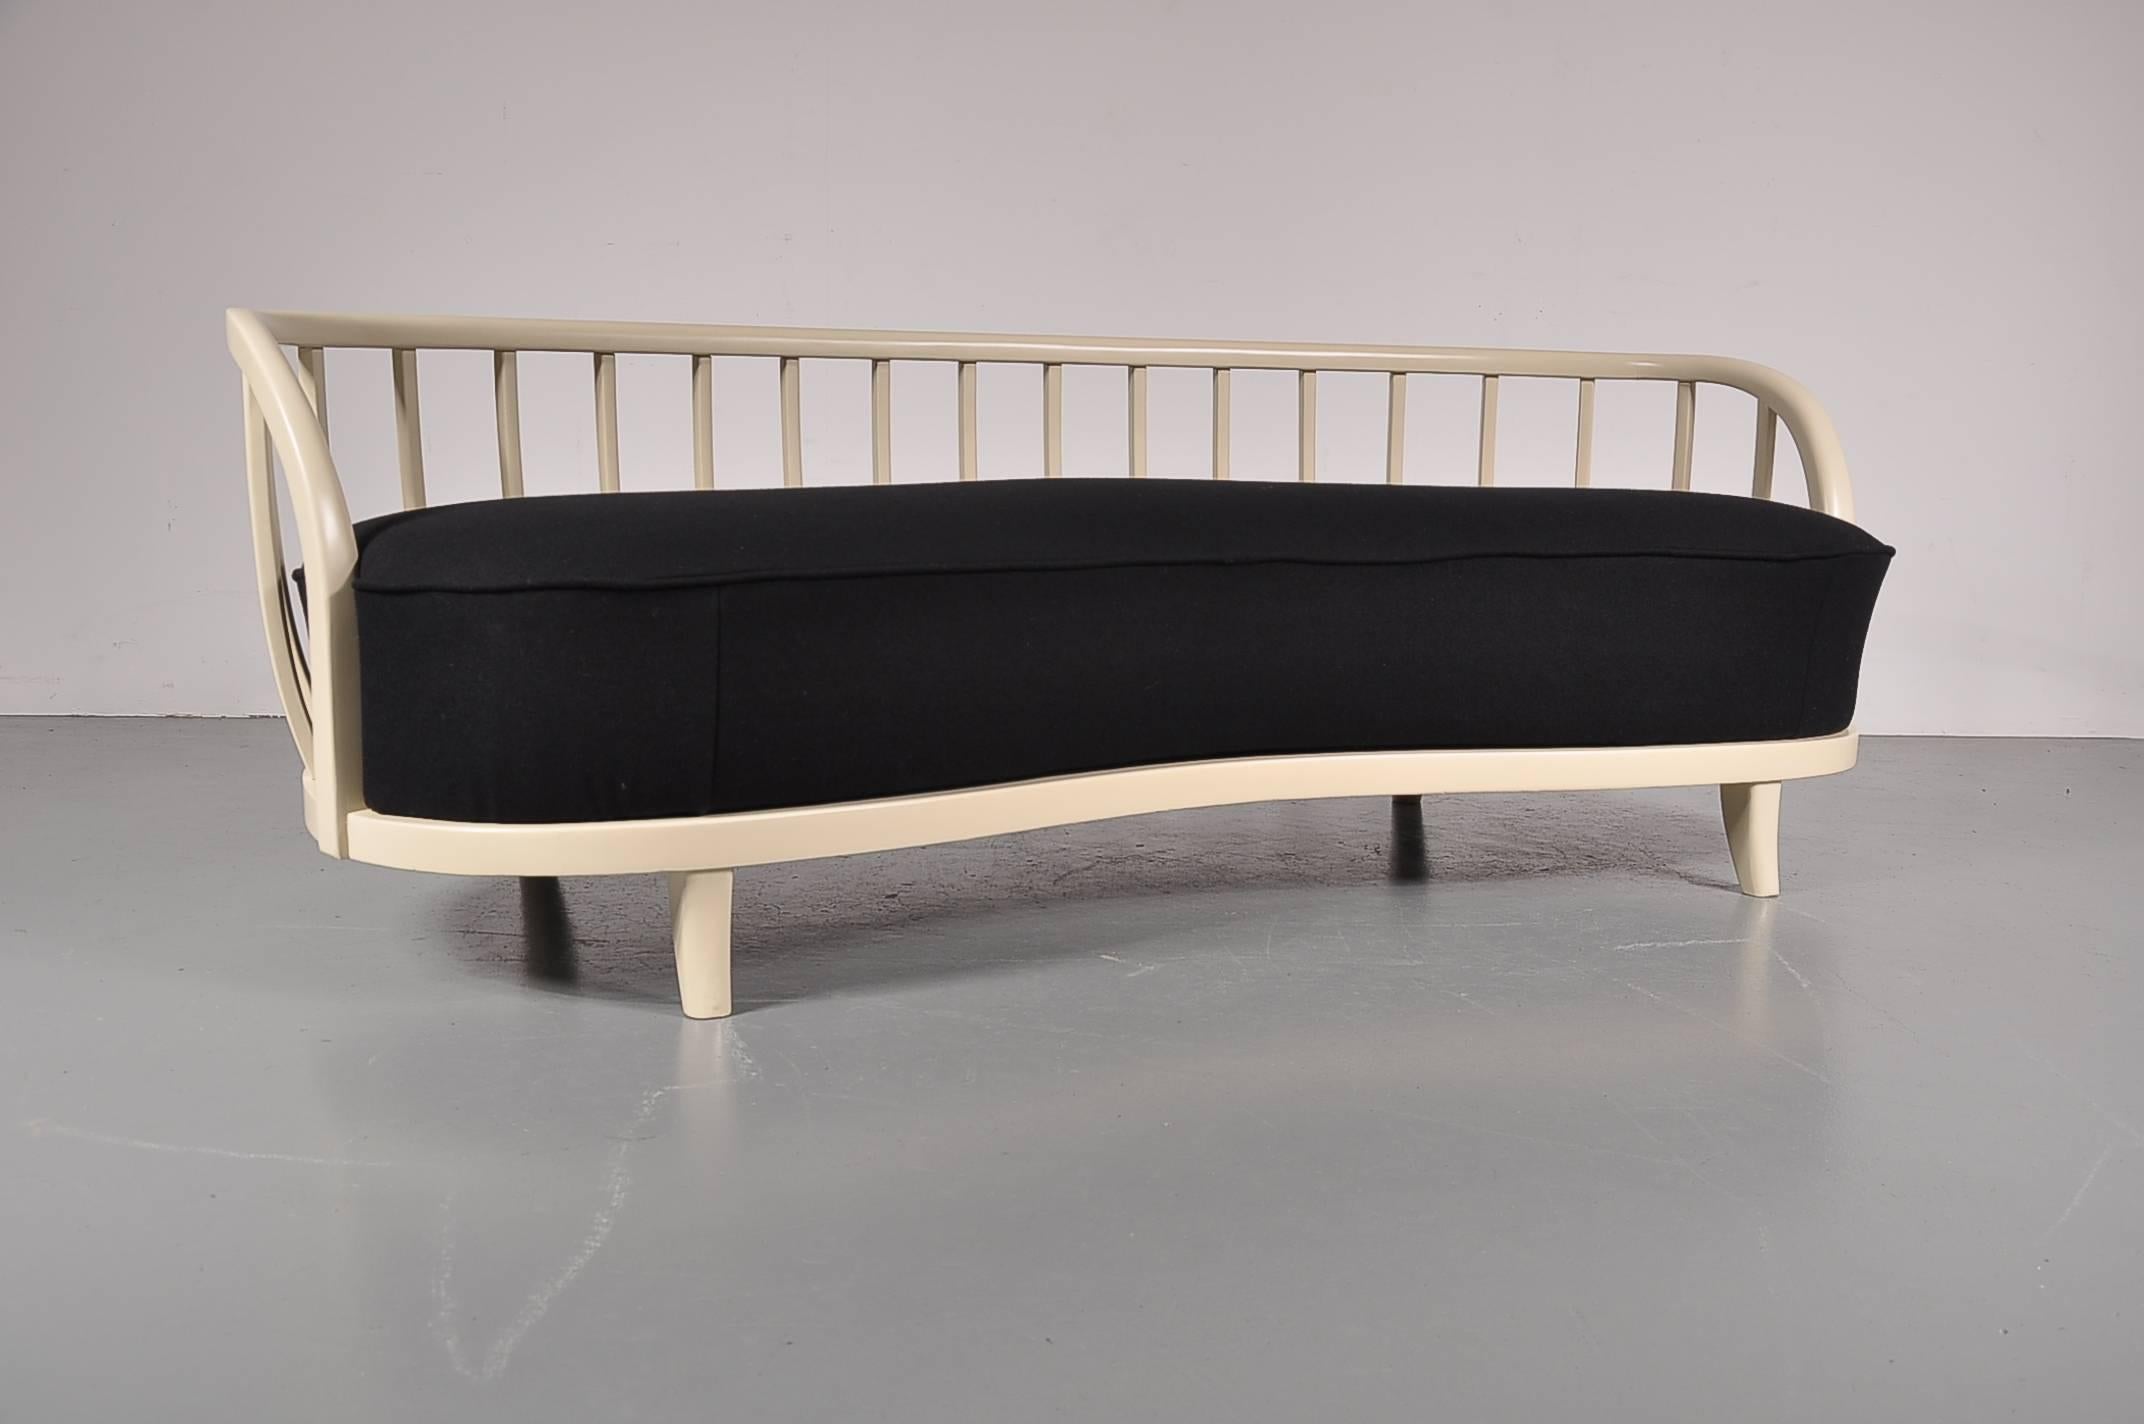 A beautiful sofa, manufactured in Scandinavia in the 1940s.

The elegant shape of the backrest is what makes this sofa stand out. Made of high quality lacquered wood and with spokes in the backrest, the overall design has a true sense of luxury.